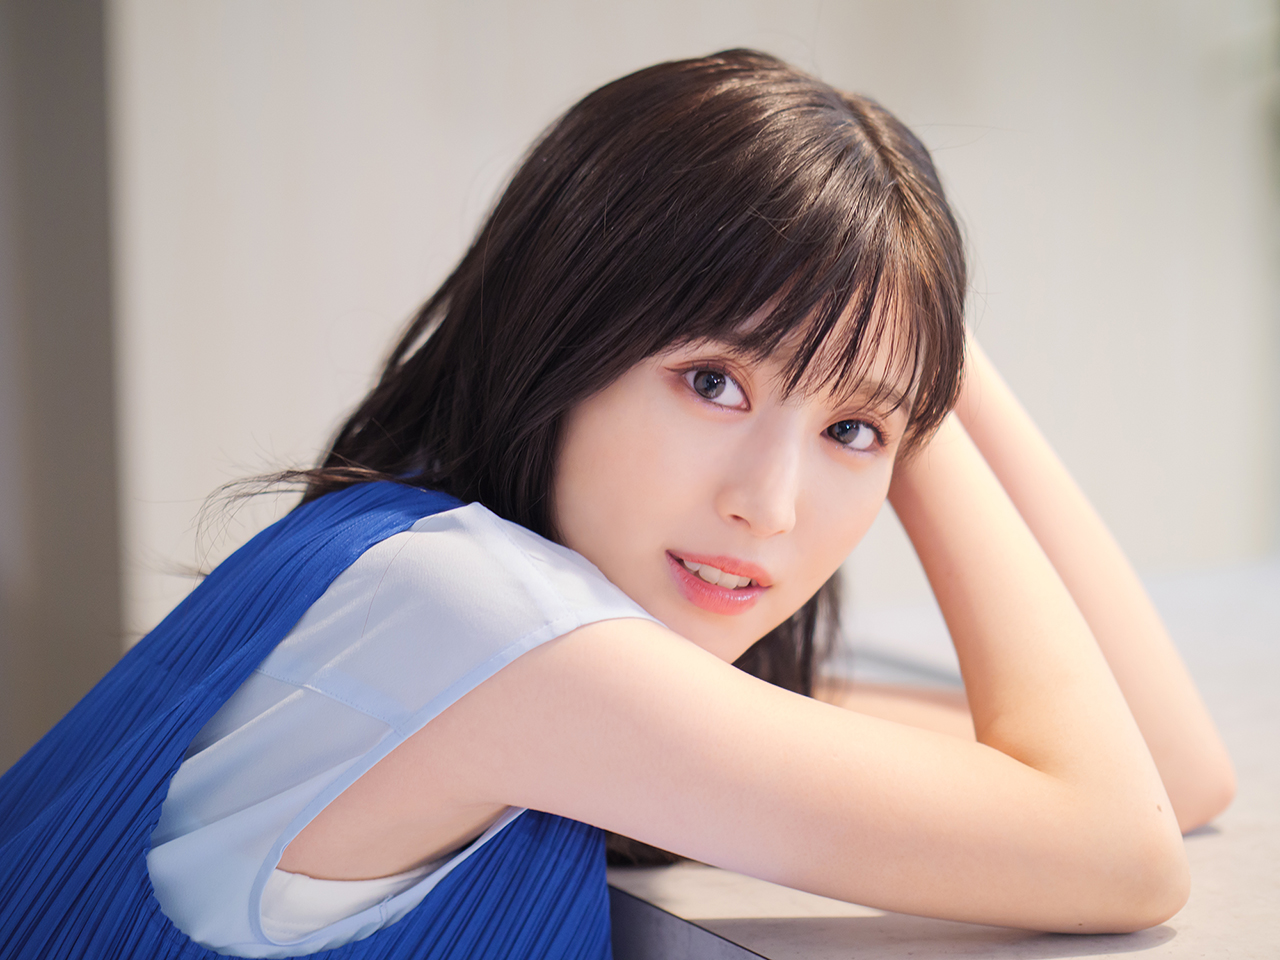 PICK UP ACTRESS 福本莉子 | HUSTLE PRESS OFFICIAL WEB SITE